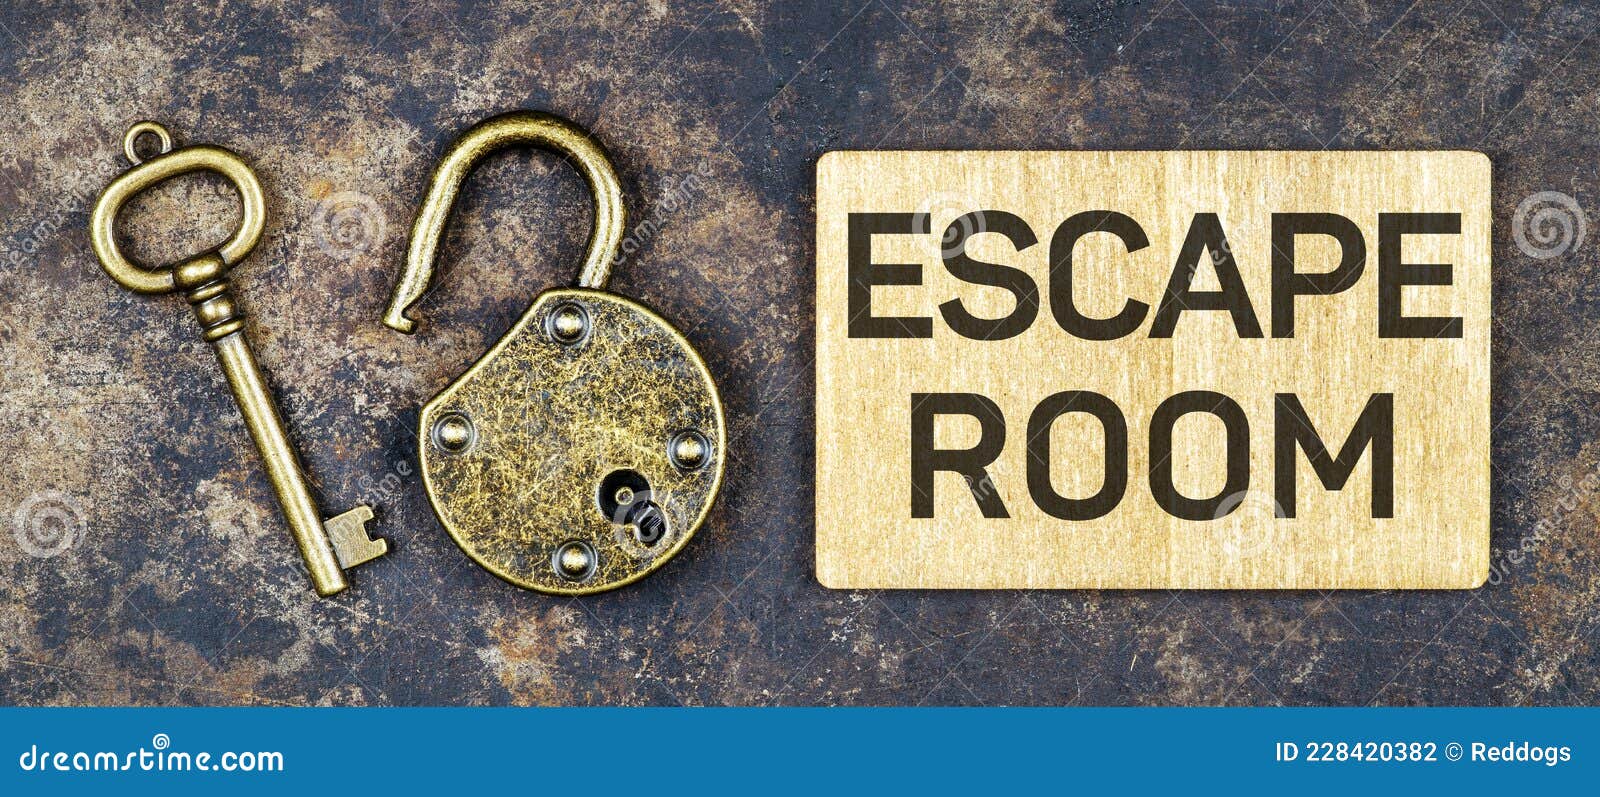 escape room game concept, old vintage key and padlock